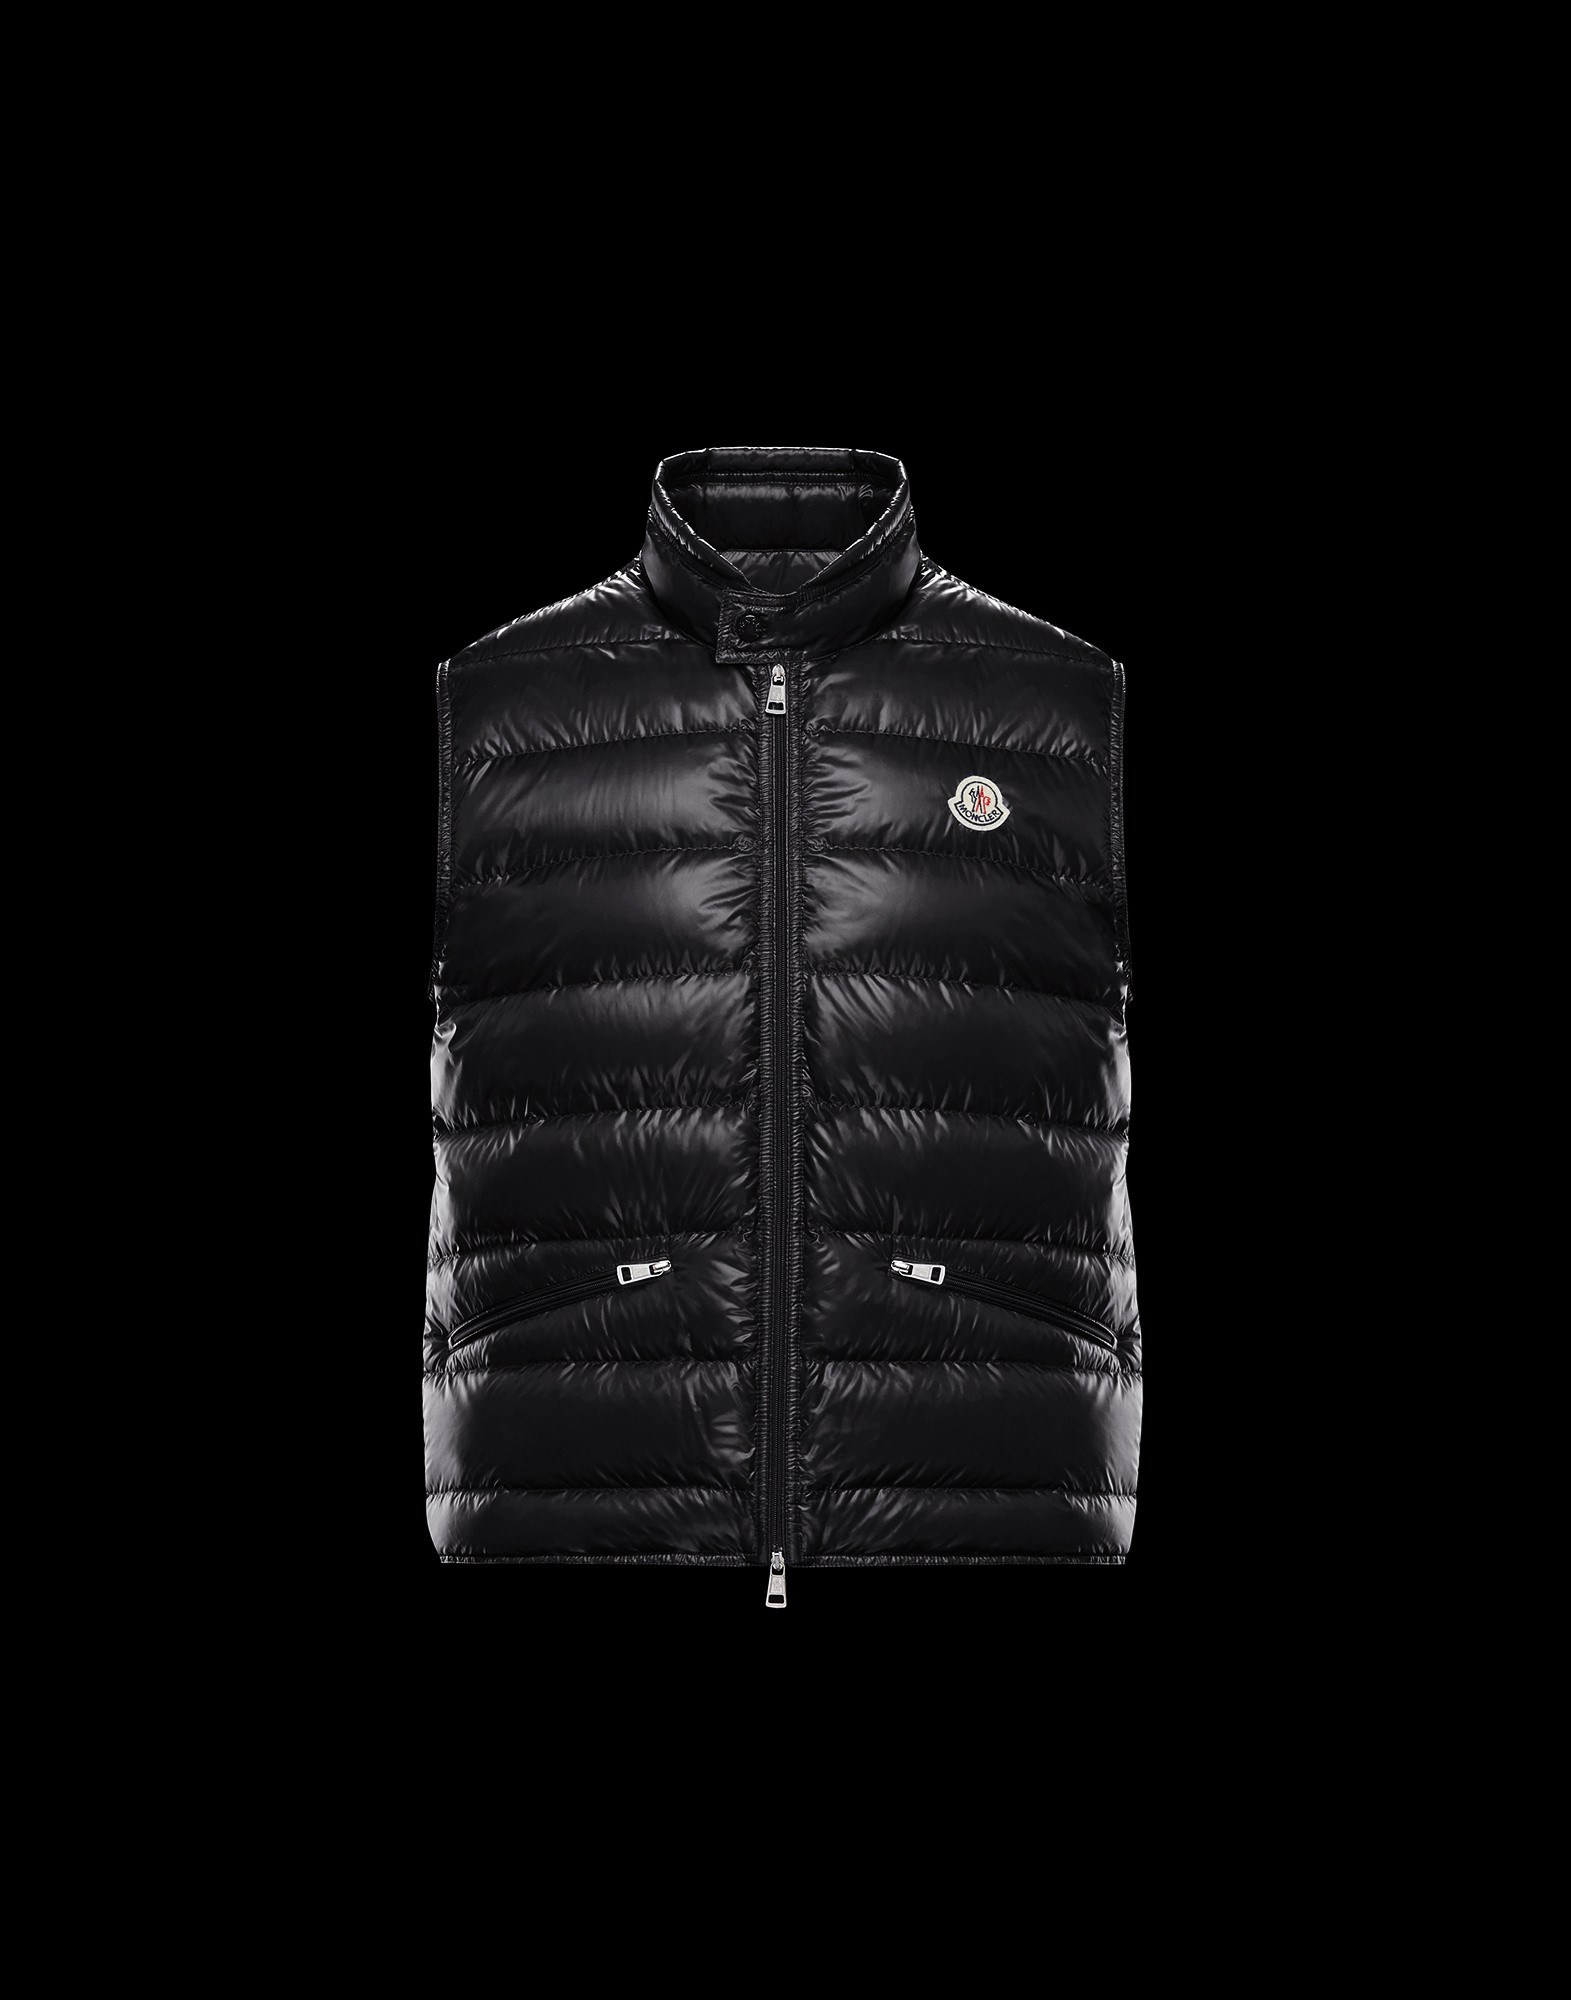 moncler corporate